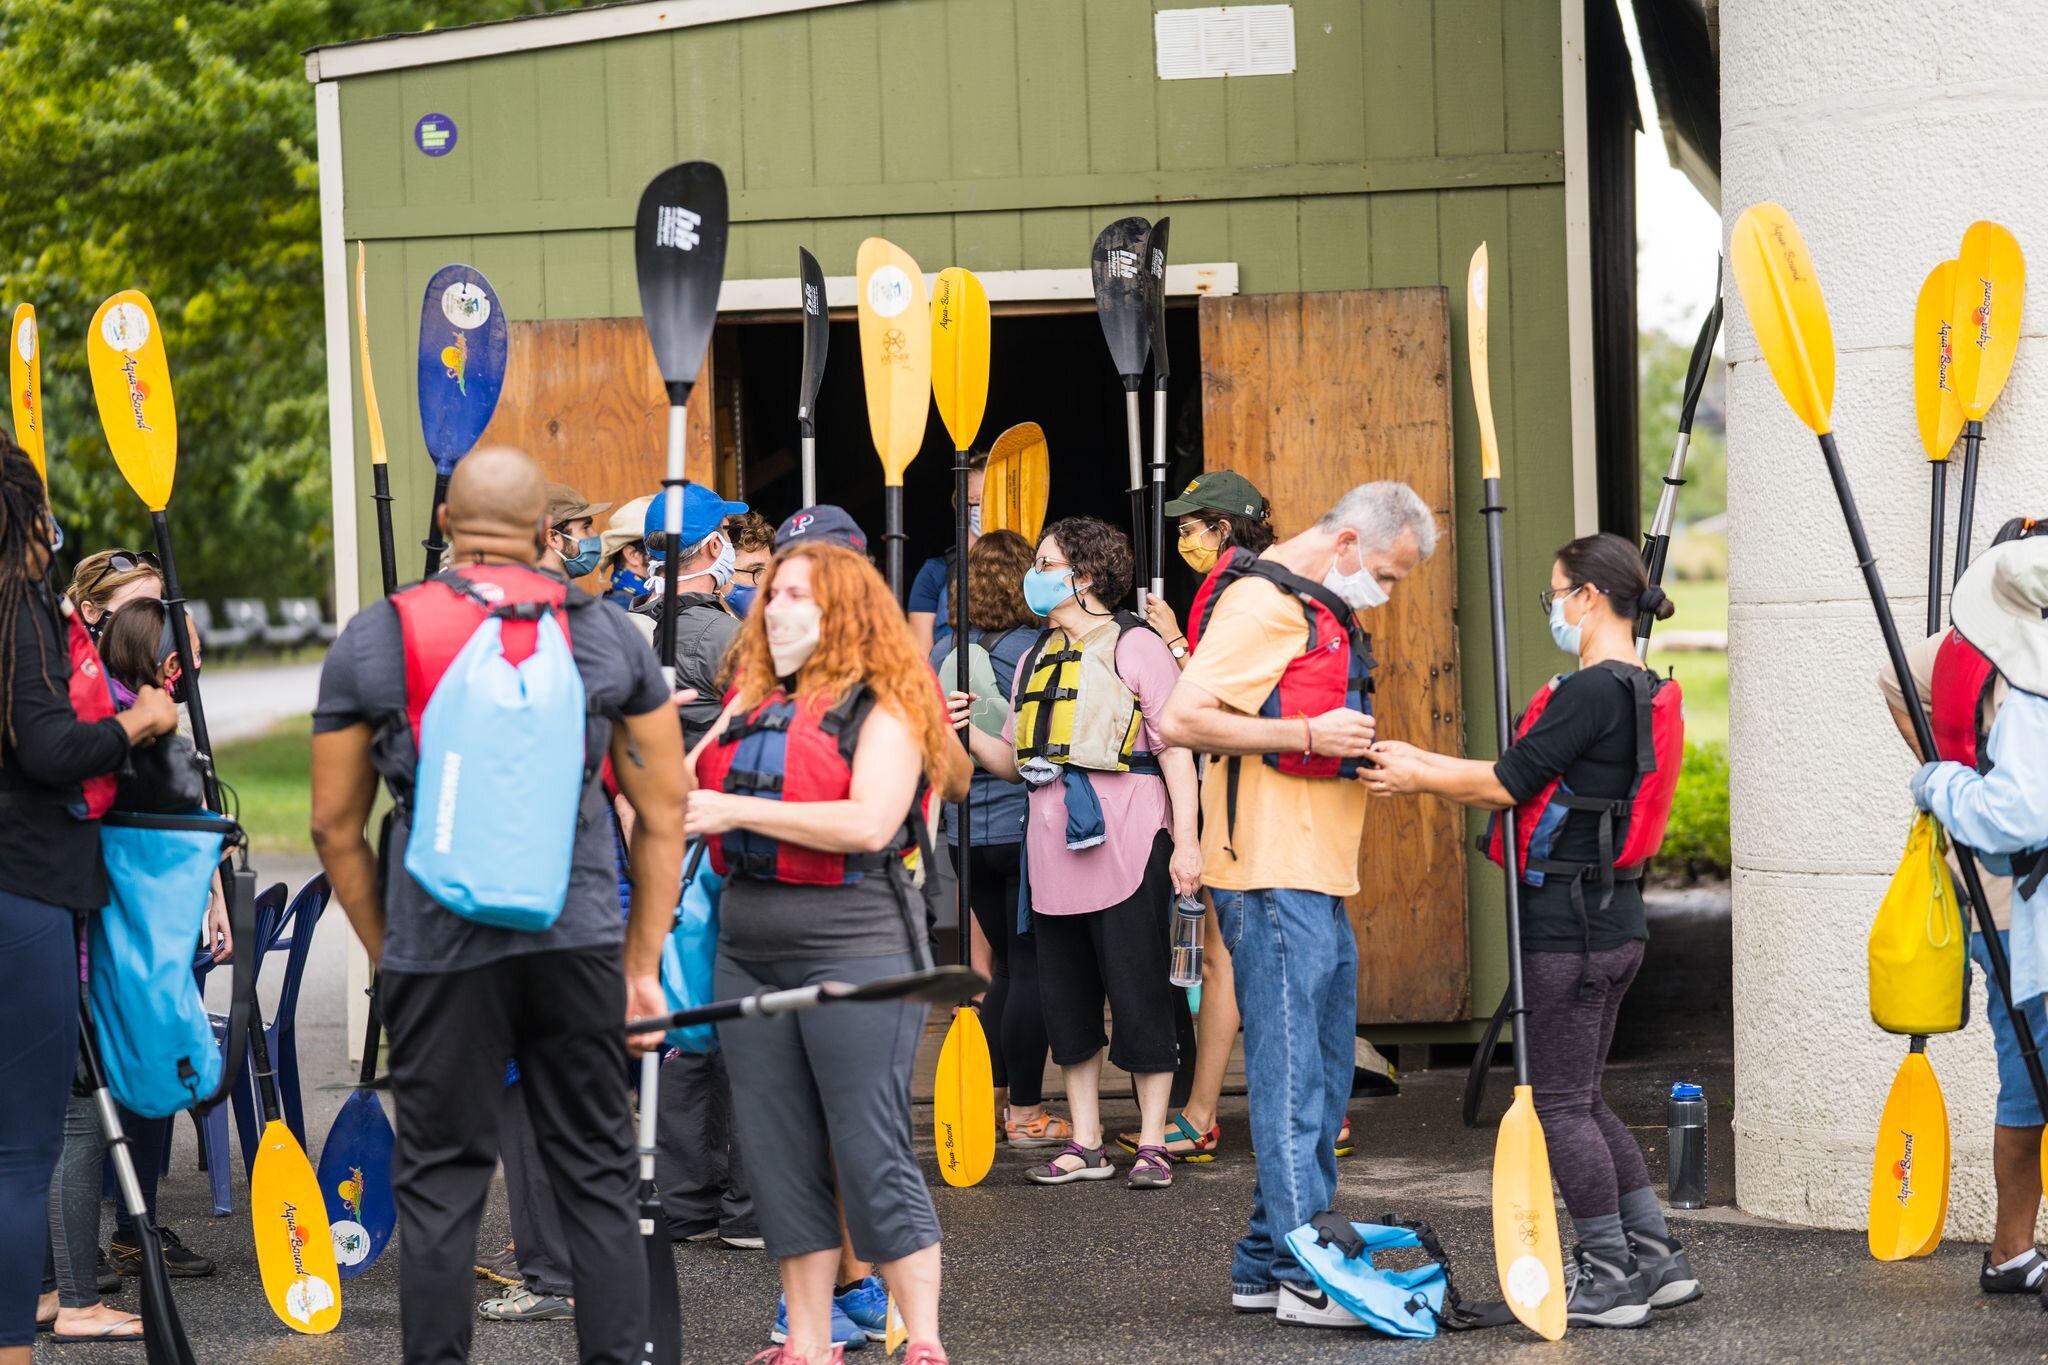 Instructors gathered at the Fairmount Water Works in September for a kayaking trip that allowed them to connect with the river firsthand.